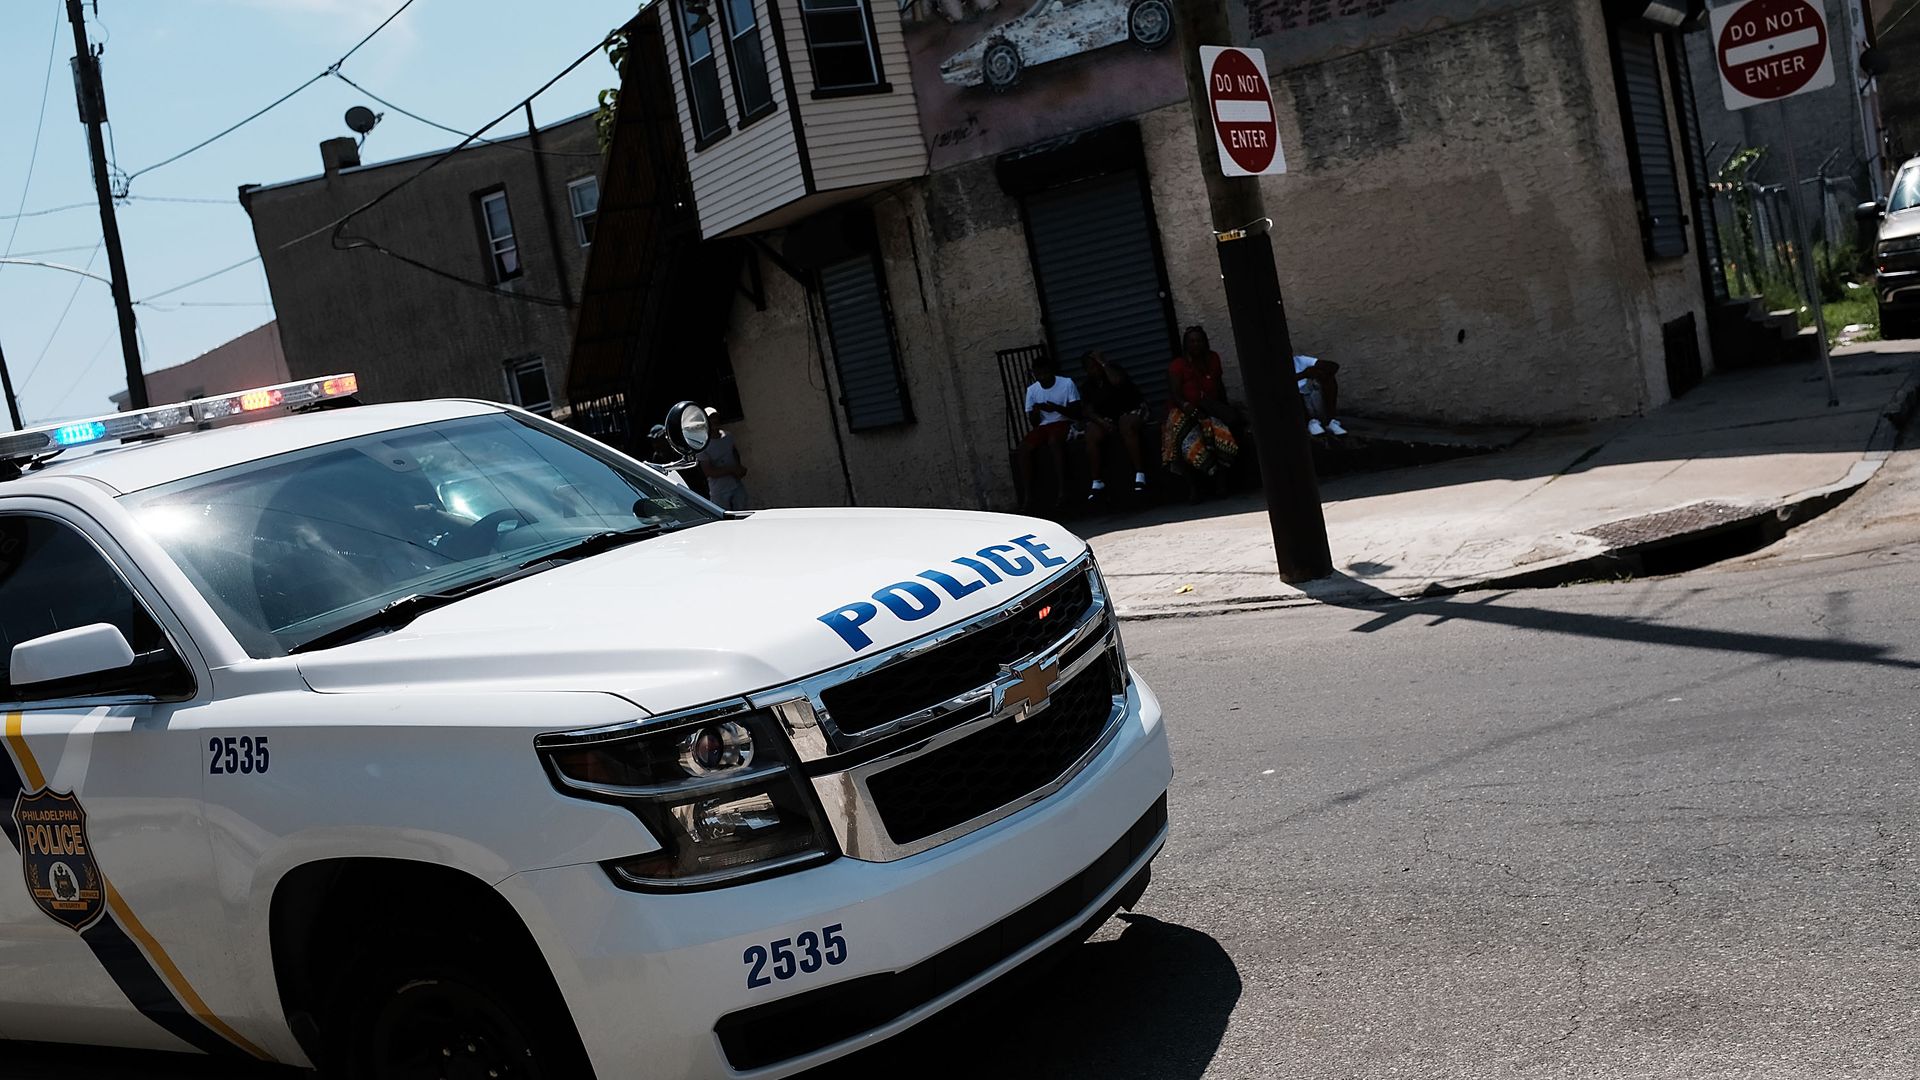 Police monitoring an area in Kensington section of Philadelphia ,which has become a hub for heroin use. Photo: Spencer Platt/Getty Images